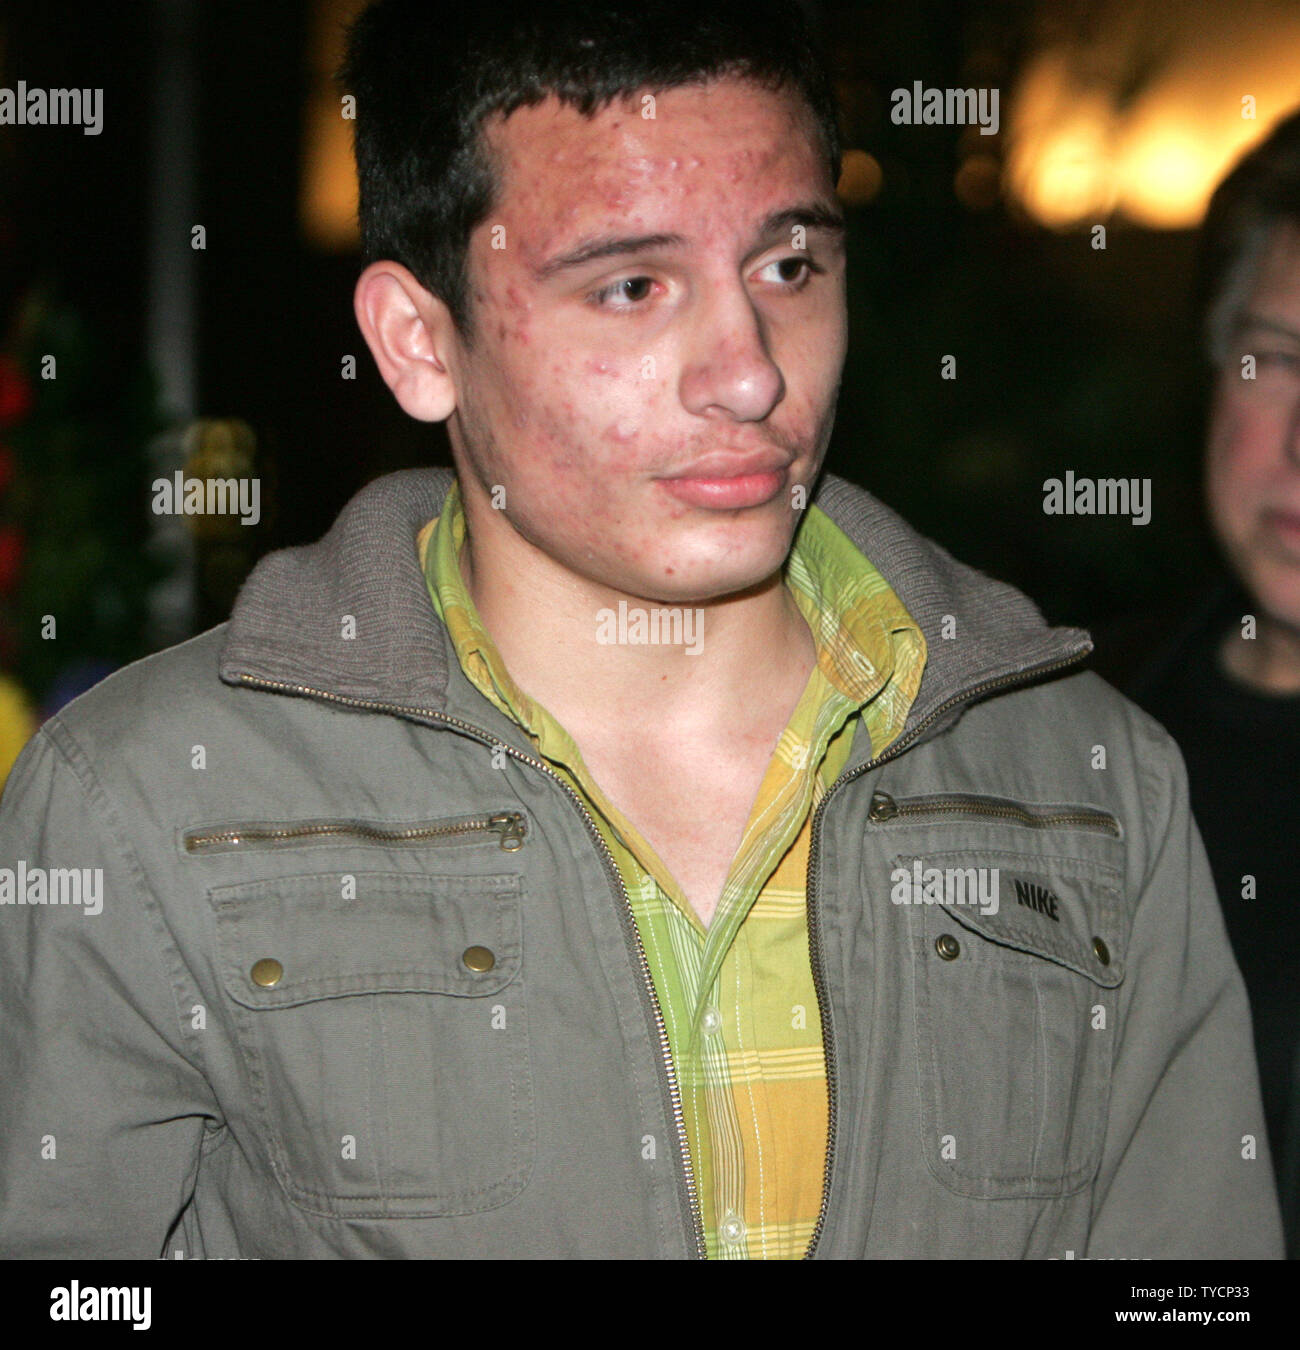 Unbeaten welterweight Omar Chavez, brother of unbeaten Julio Cesar Chavez Jr., attends a press conference for Julio prior to his fight with top ranked welterweight Michele Orlando in Las Vegas on March 15, 2008. The two will fight April 26, 2008.   (UPI Photo/Roger Williams) Stock Photo